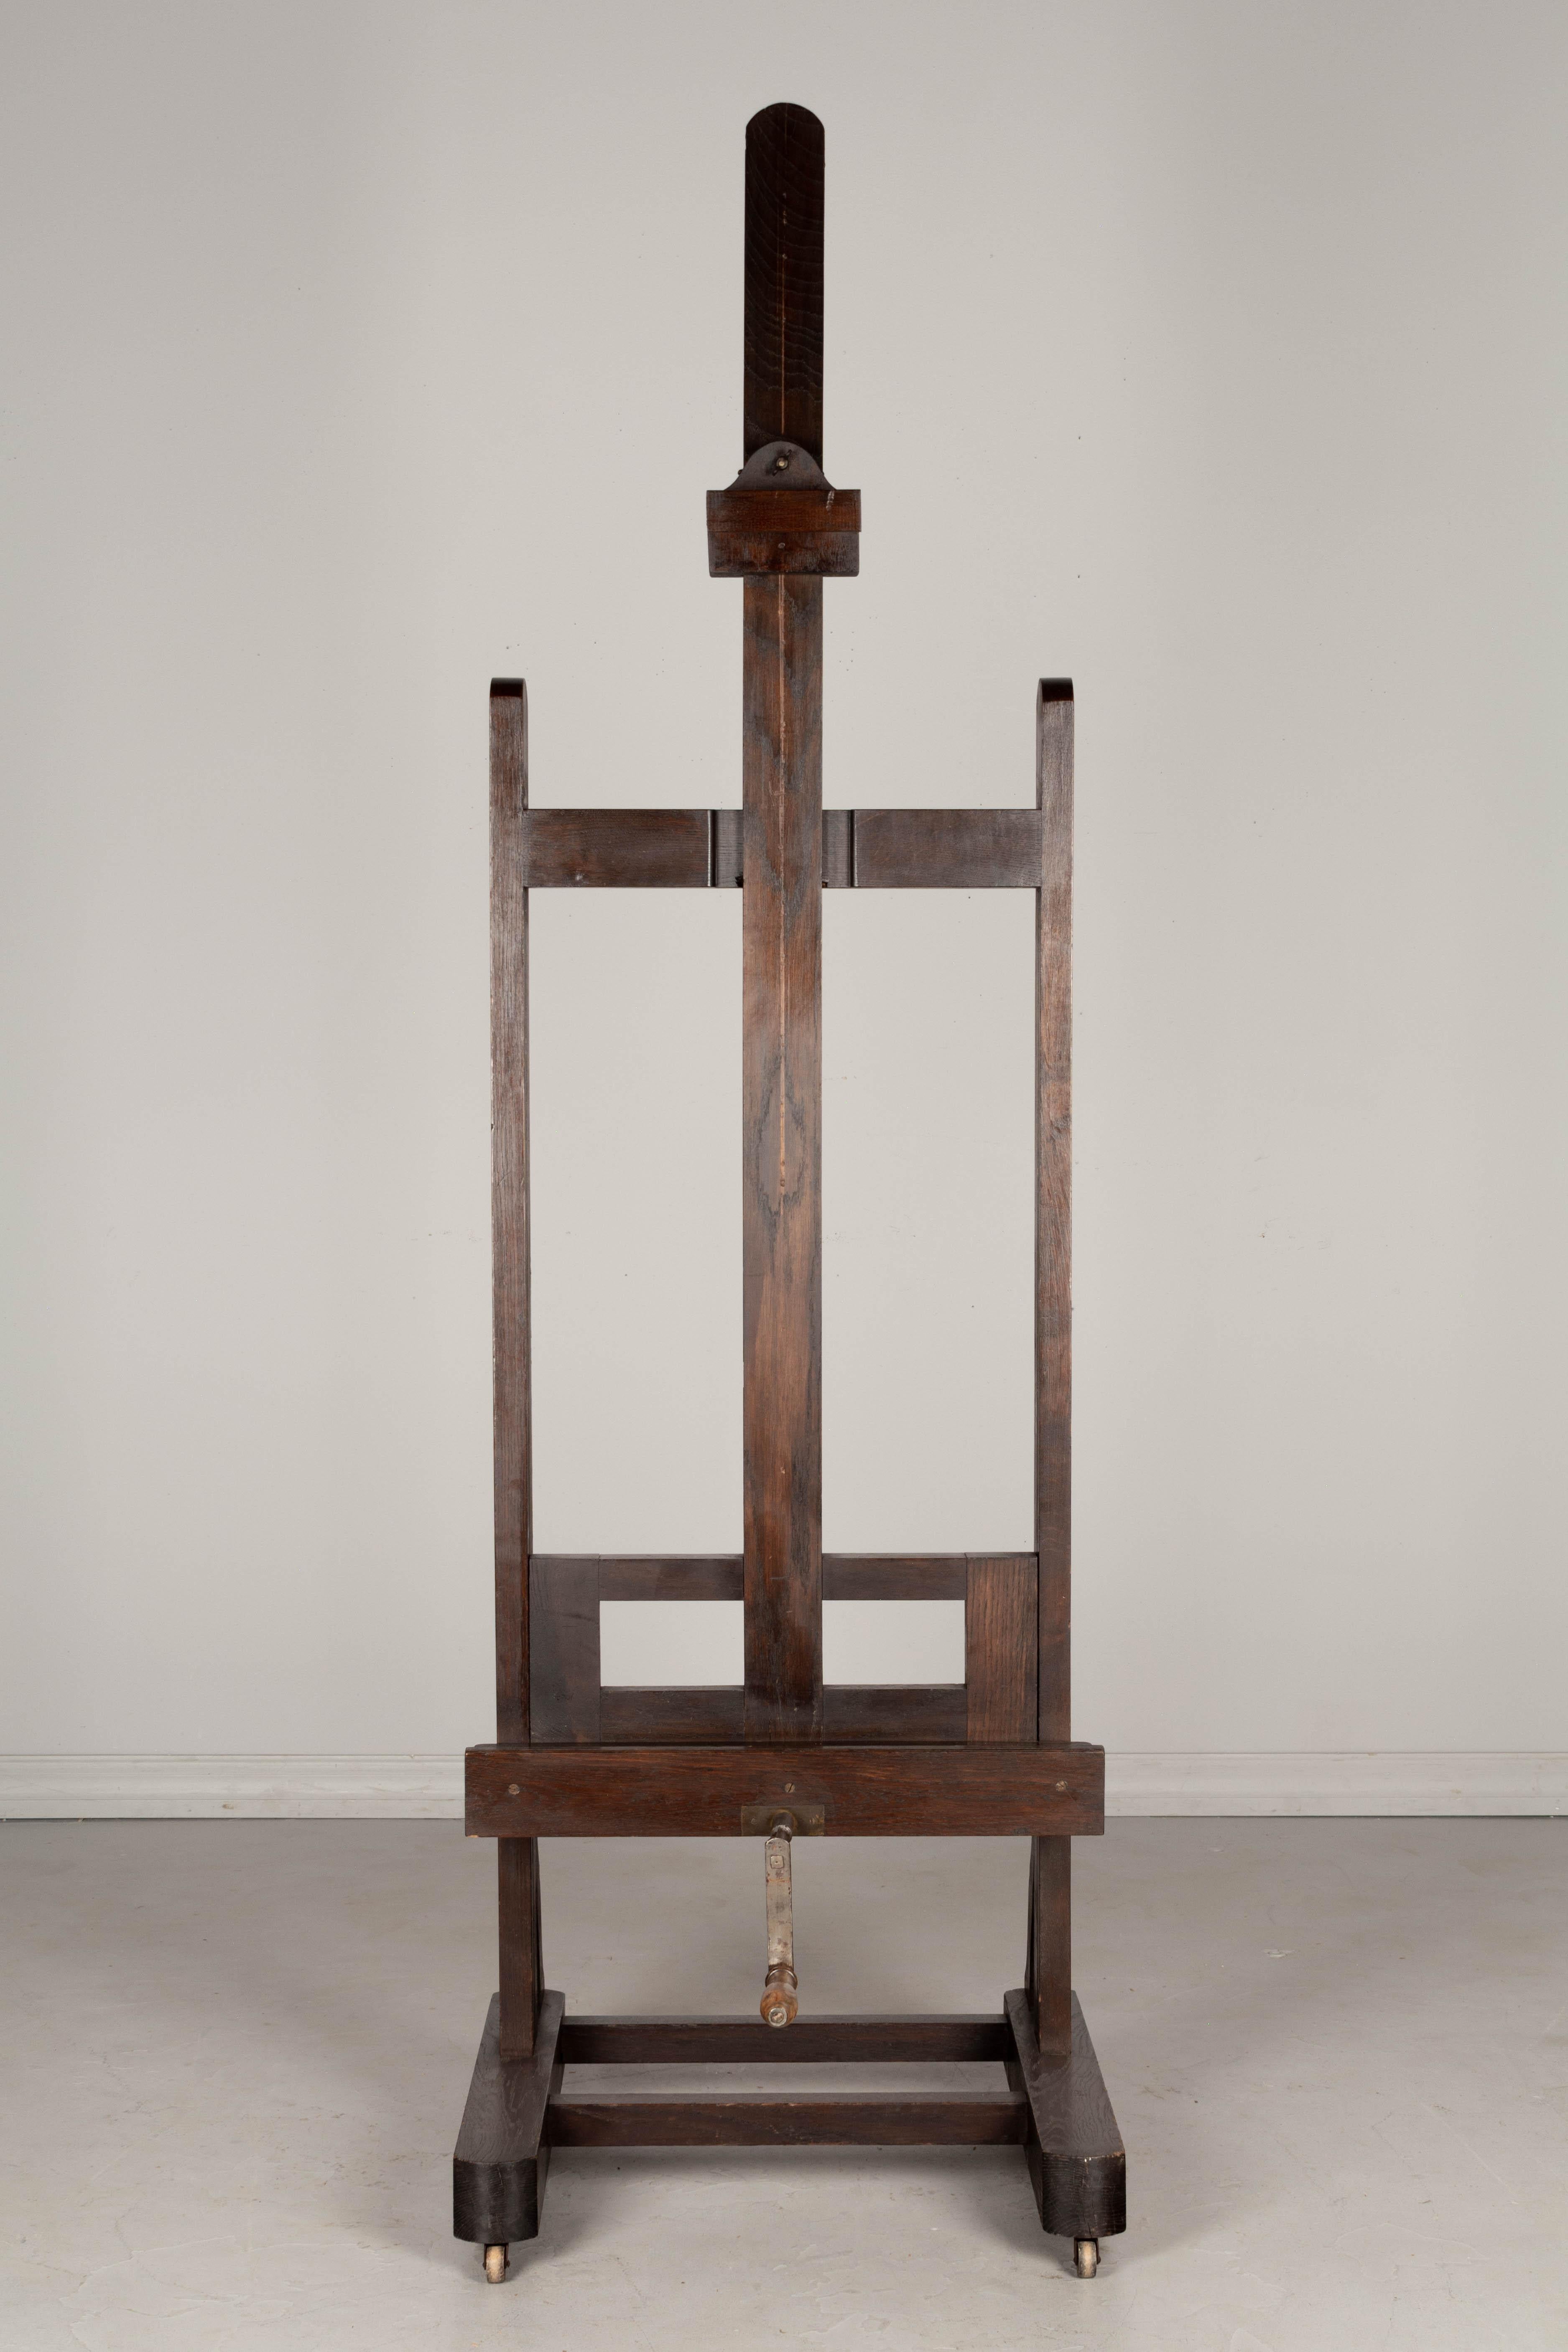 20th Century French Chevalet or Painter's Easel